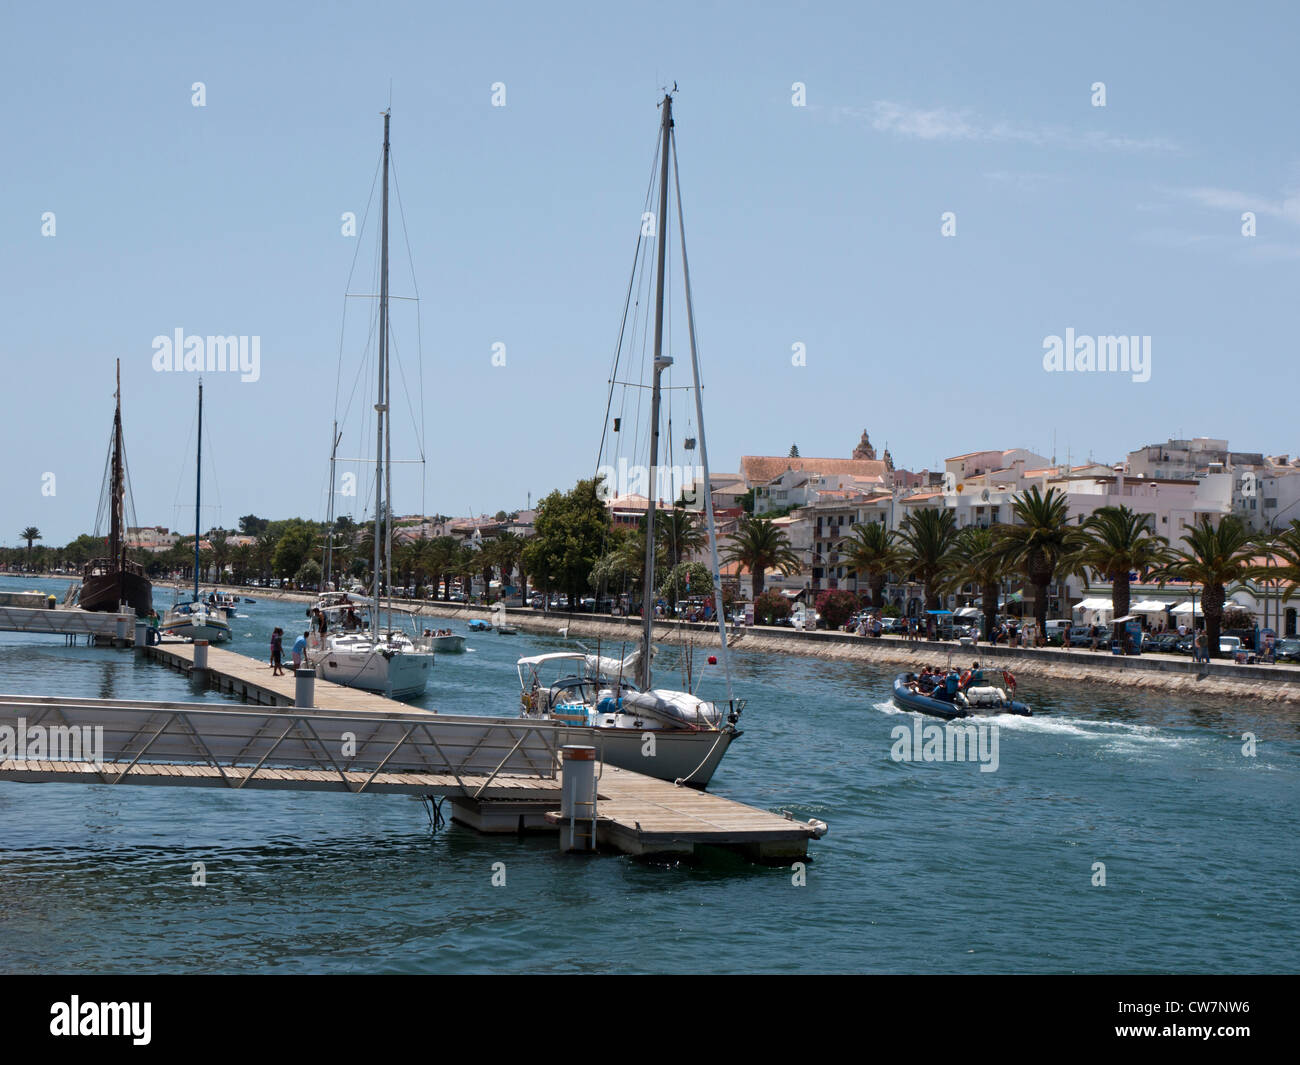 Boats docked on the Ribeira de Bensafrim leading to the marine at Lagos, Portugal. Stock Photo